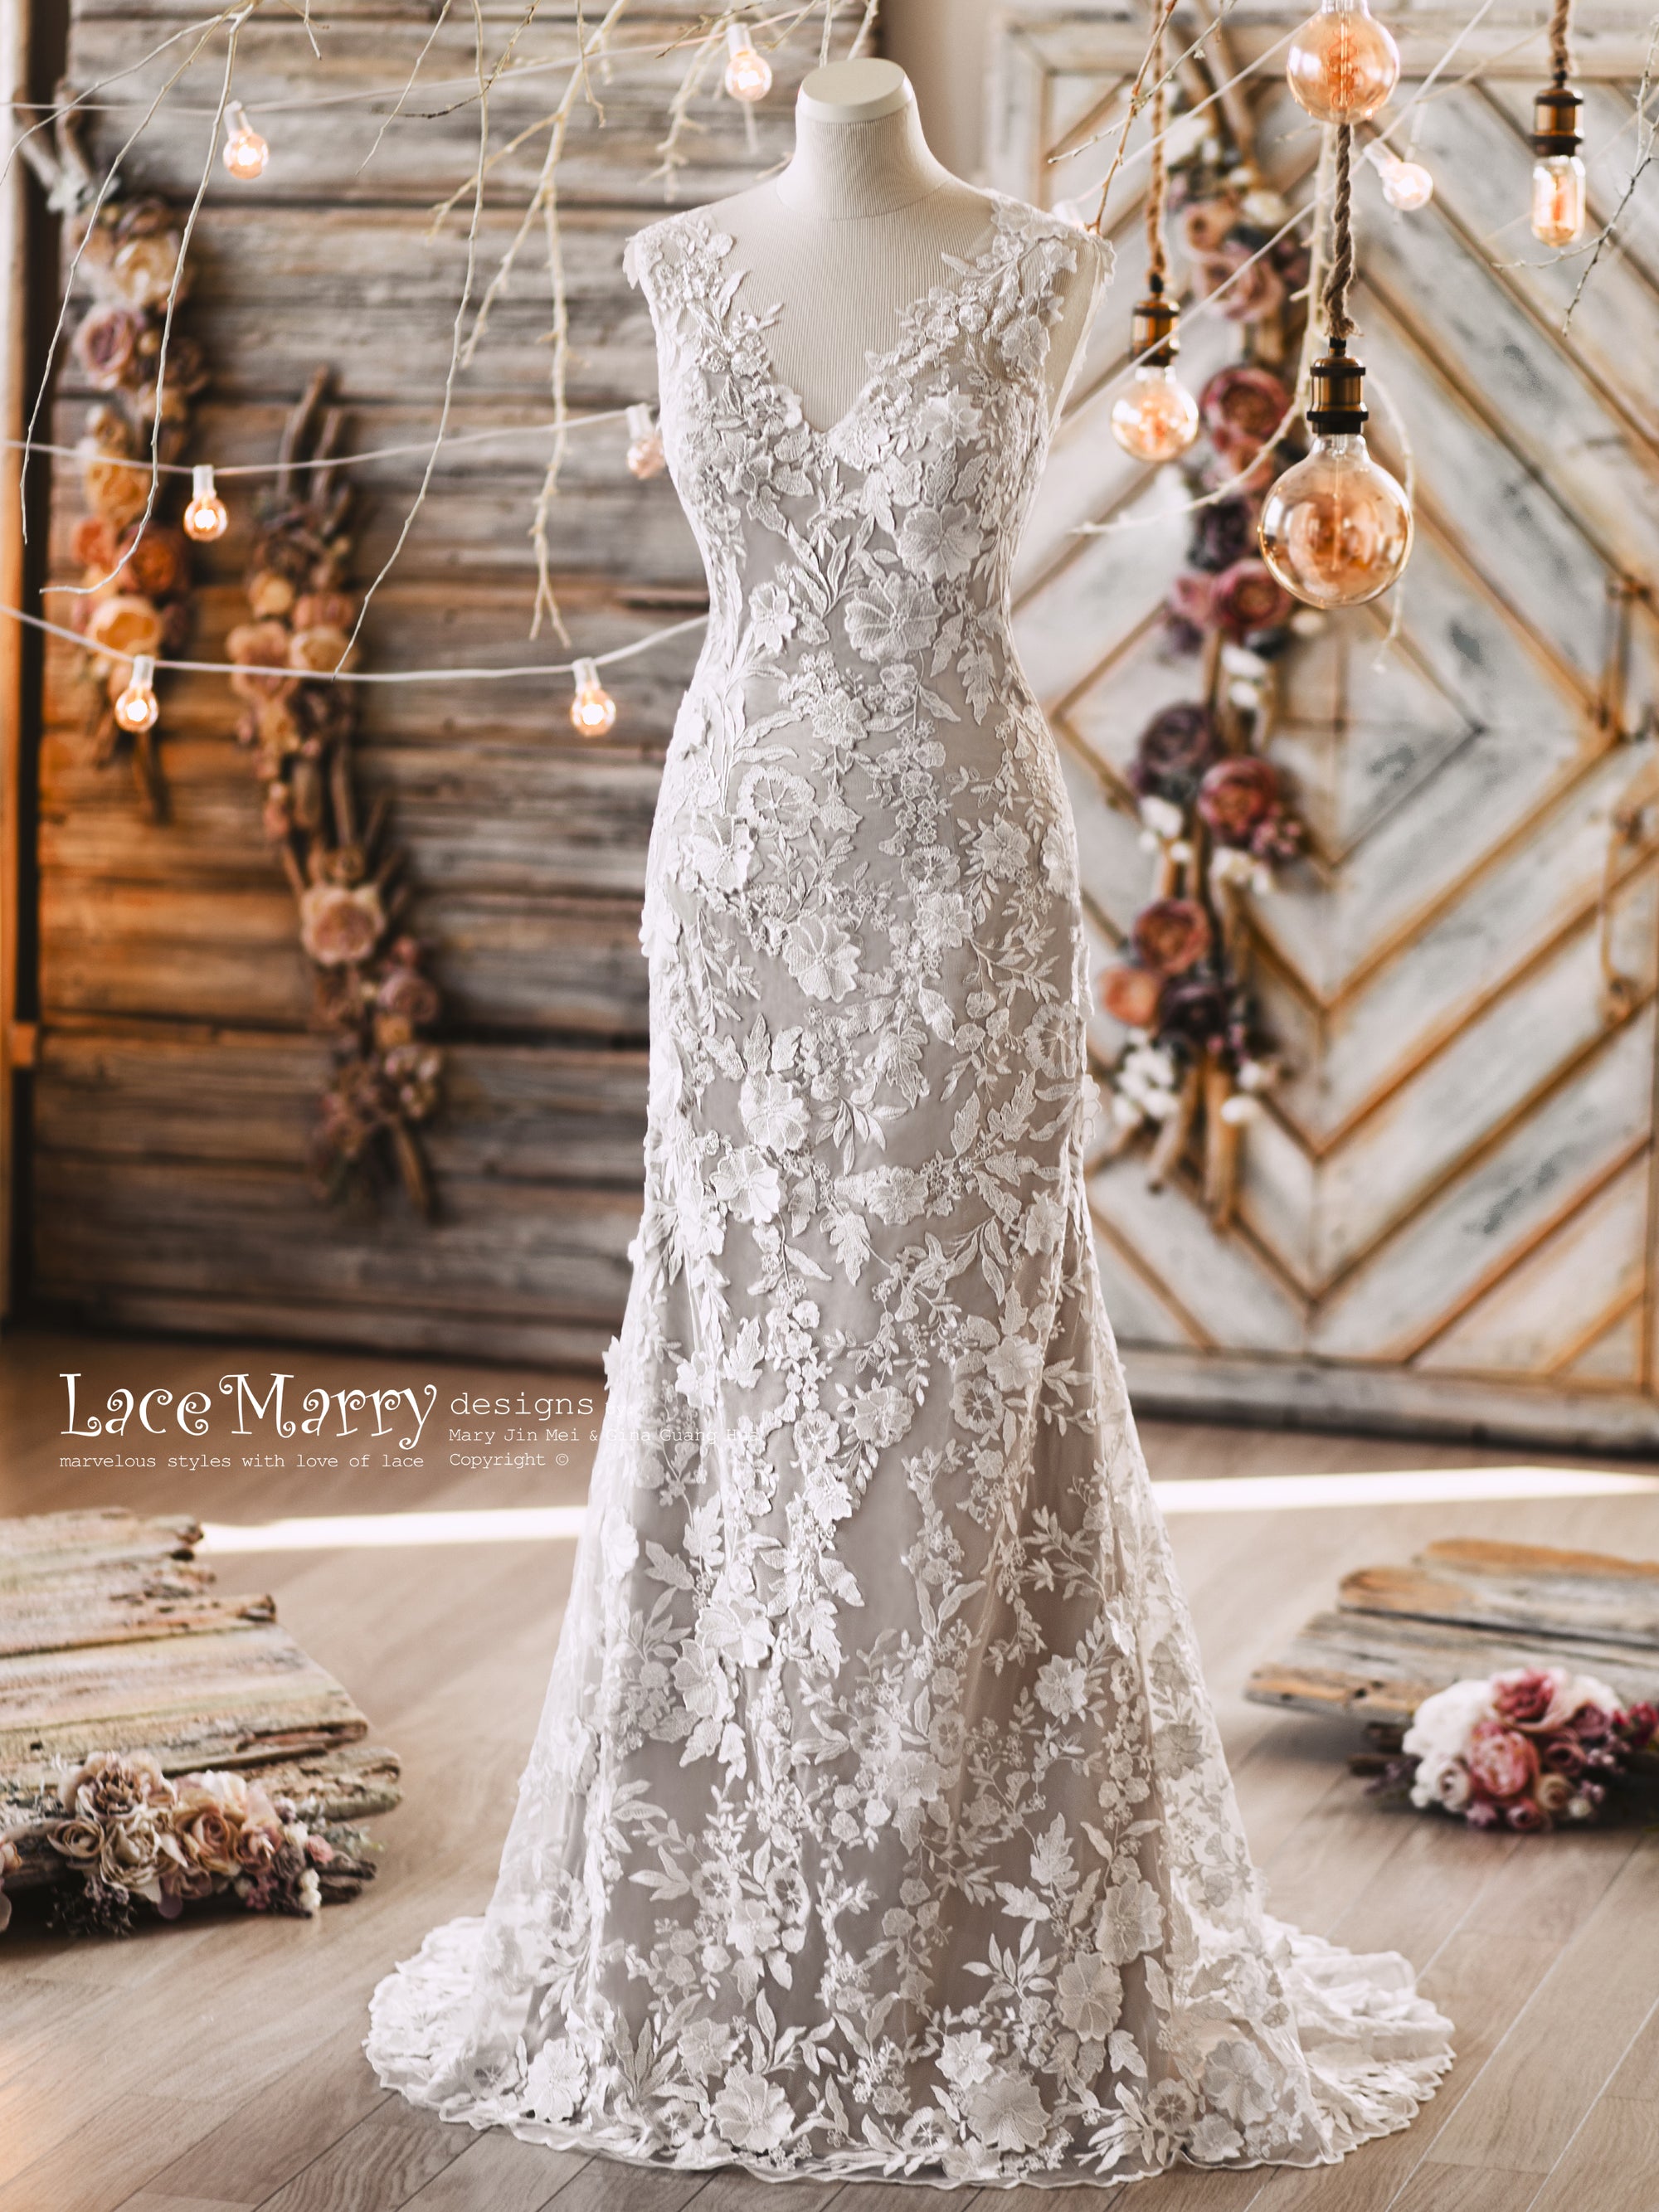 Boho Wedding Dress with Gray Underlay by LaceMarry